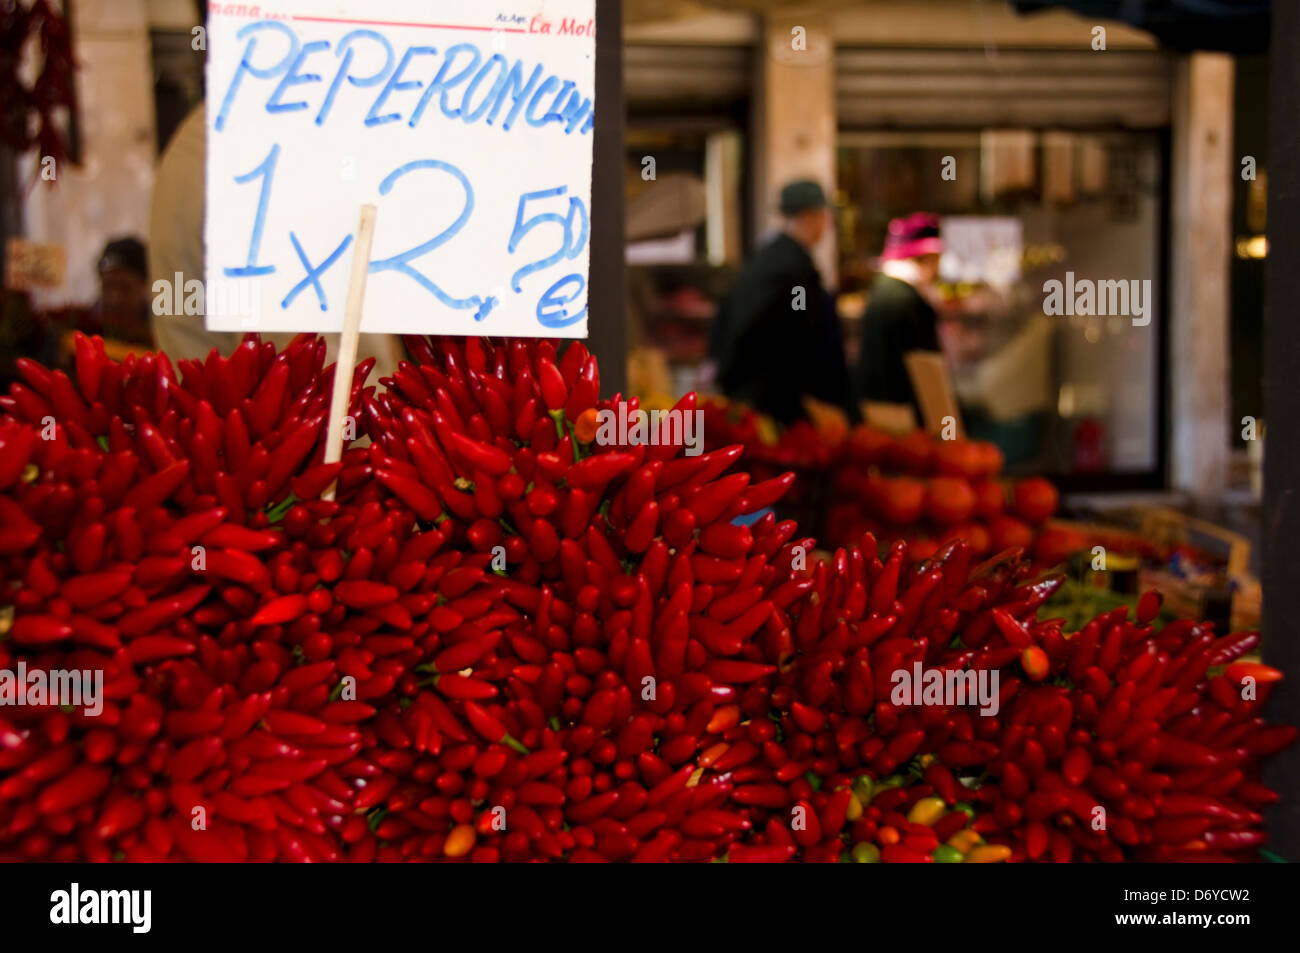 Malagueta red chili peppers for sale at a market stall, Venice, Veneto, Italy Stock Photo